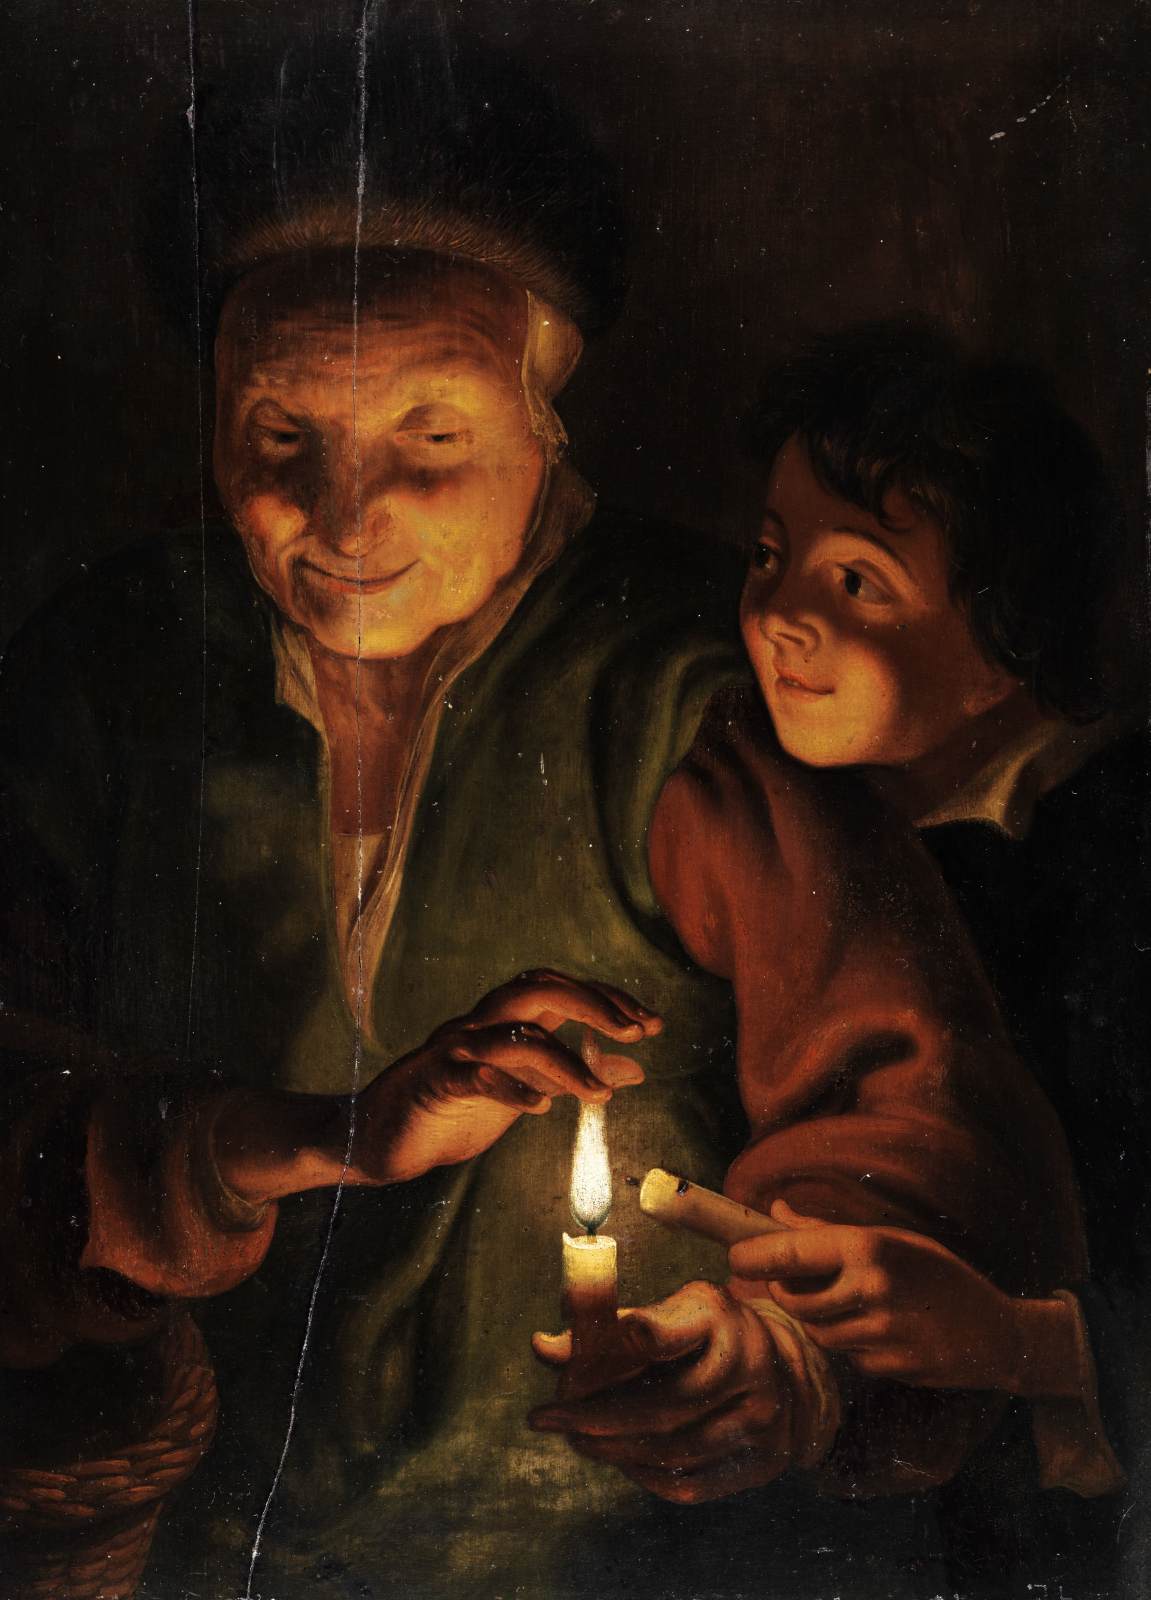 Old Woman with Boy by Candlelight